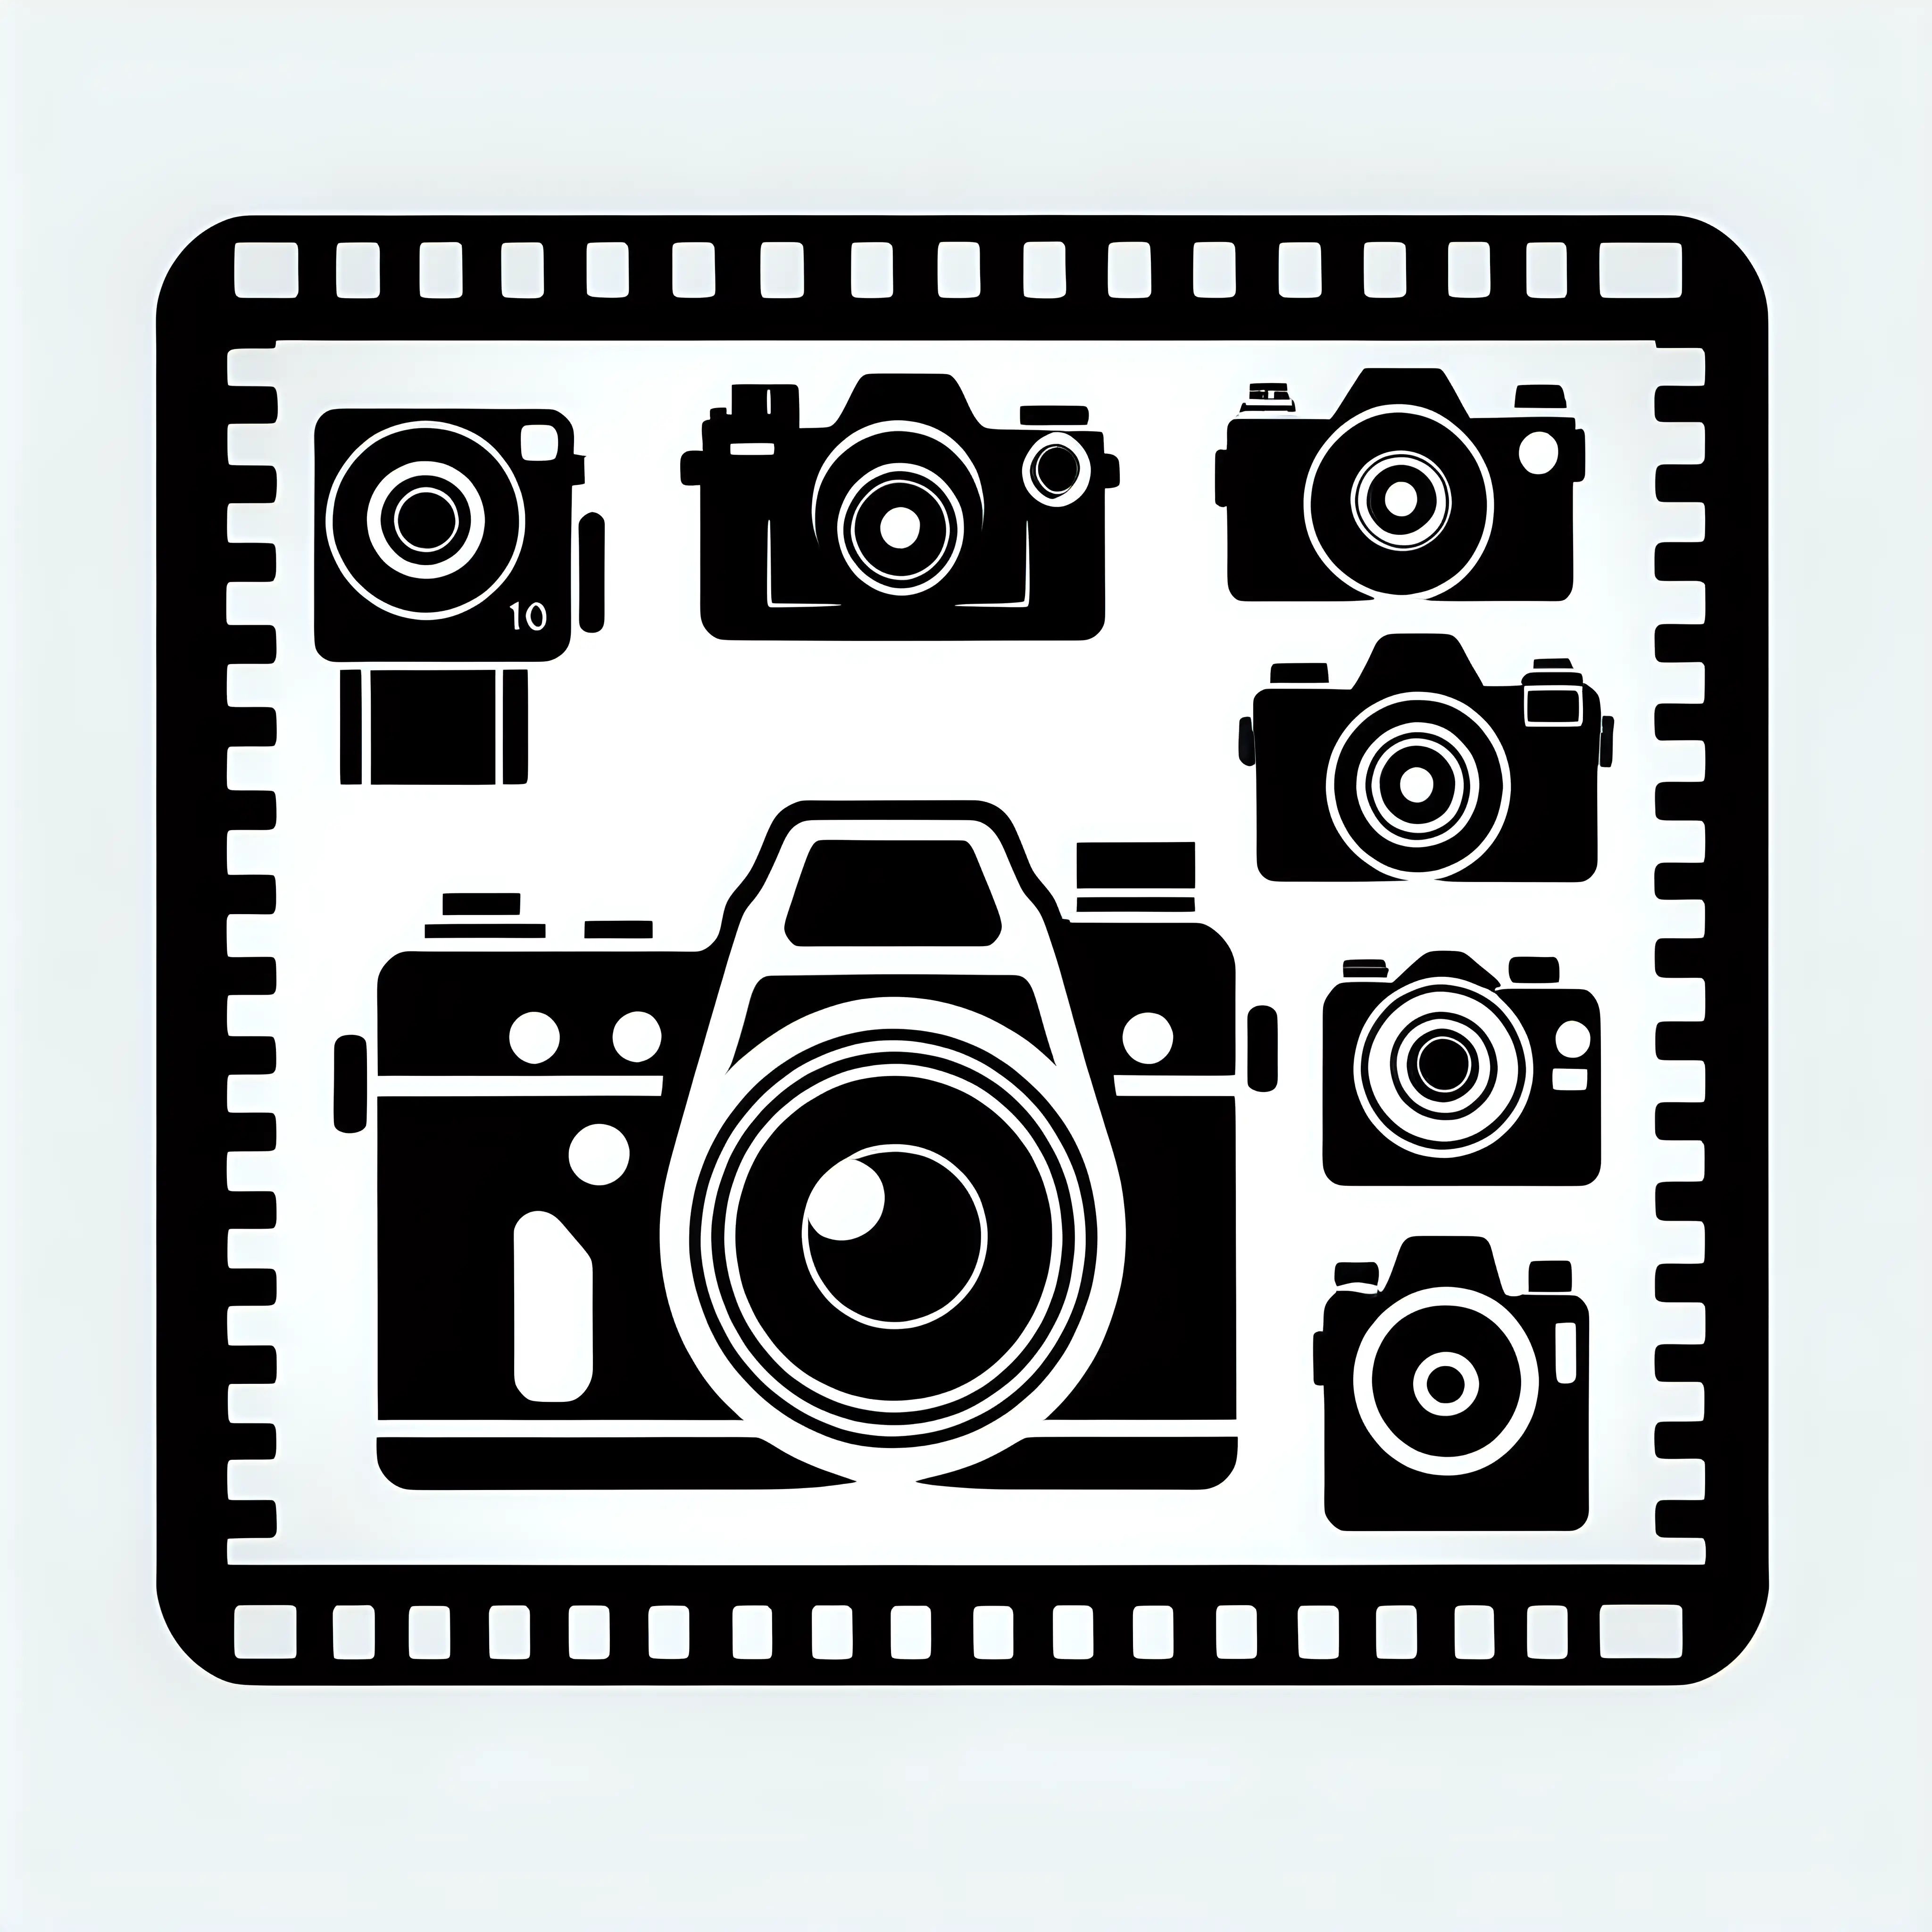 Make an art  for a photography and video business using iconography using only black and white colors and icons. The cameras should be black based on the design of top flagship professional photojournalism camera as the R3 Canon.  The camera is a silhouette like an icon. Cameras don't feature canon logos please. At the back ground a film frame should be like an old style negative film borders. 